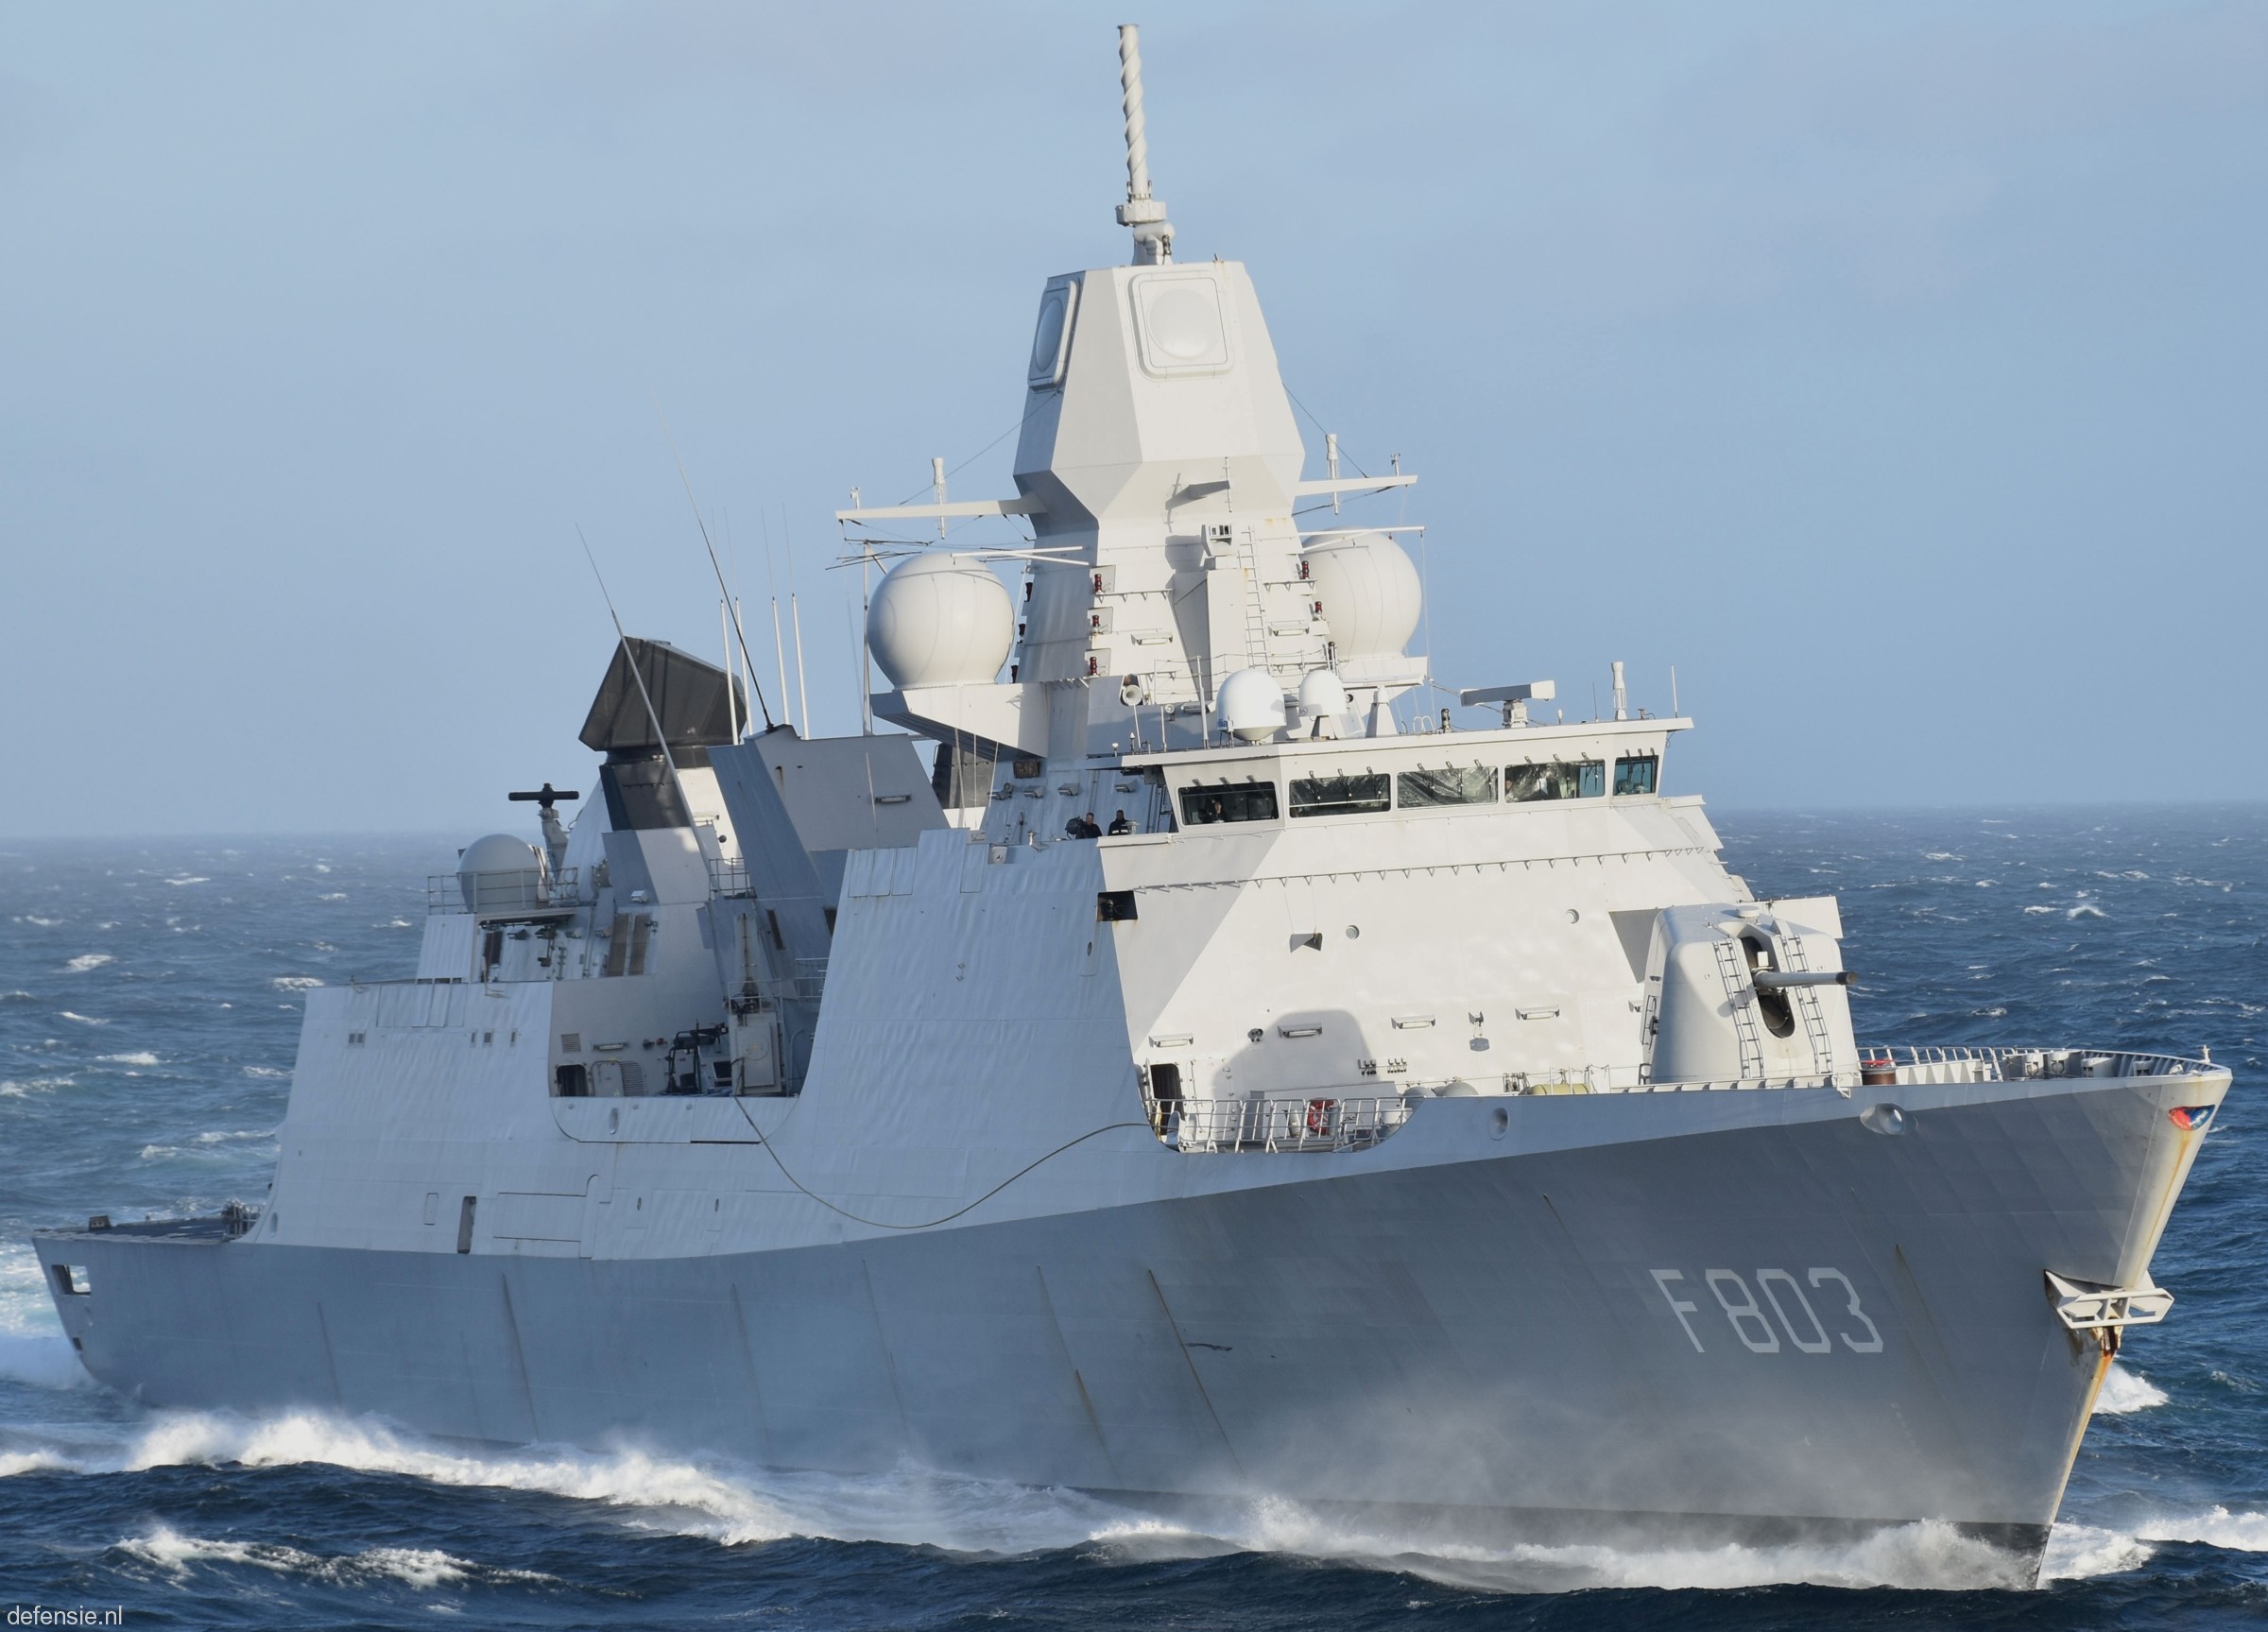 f-803 hnlms tromp guided missile frigate ffg air defense lcf royal netherlands navy 27